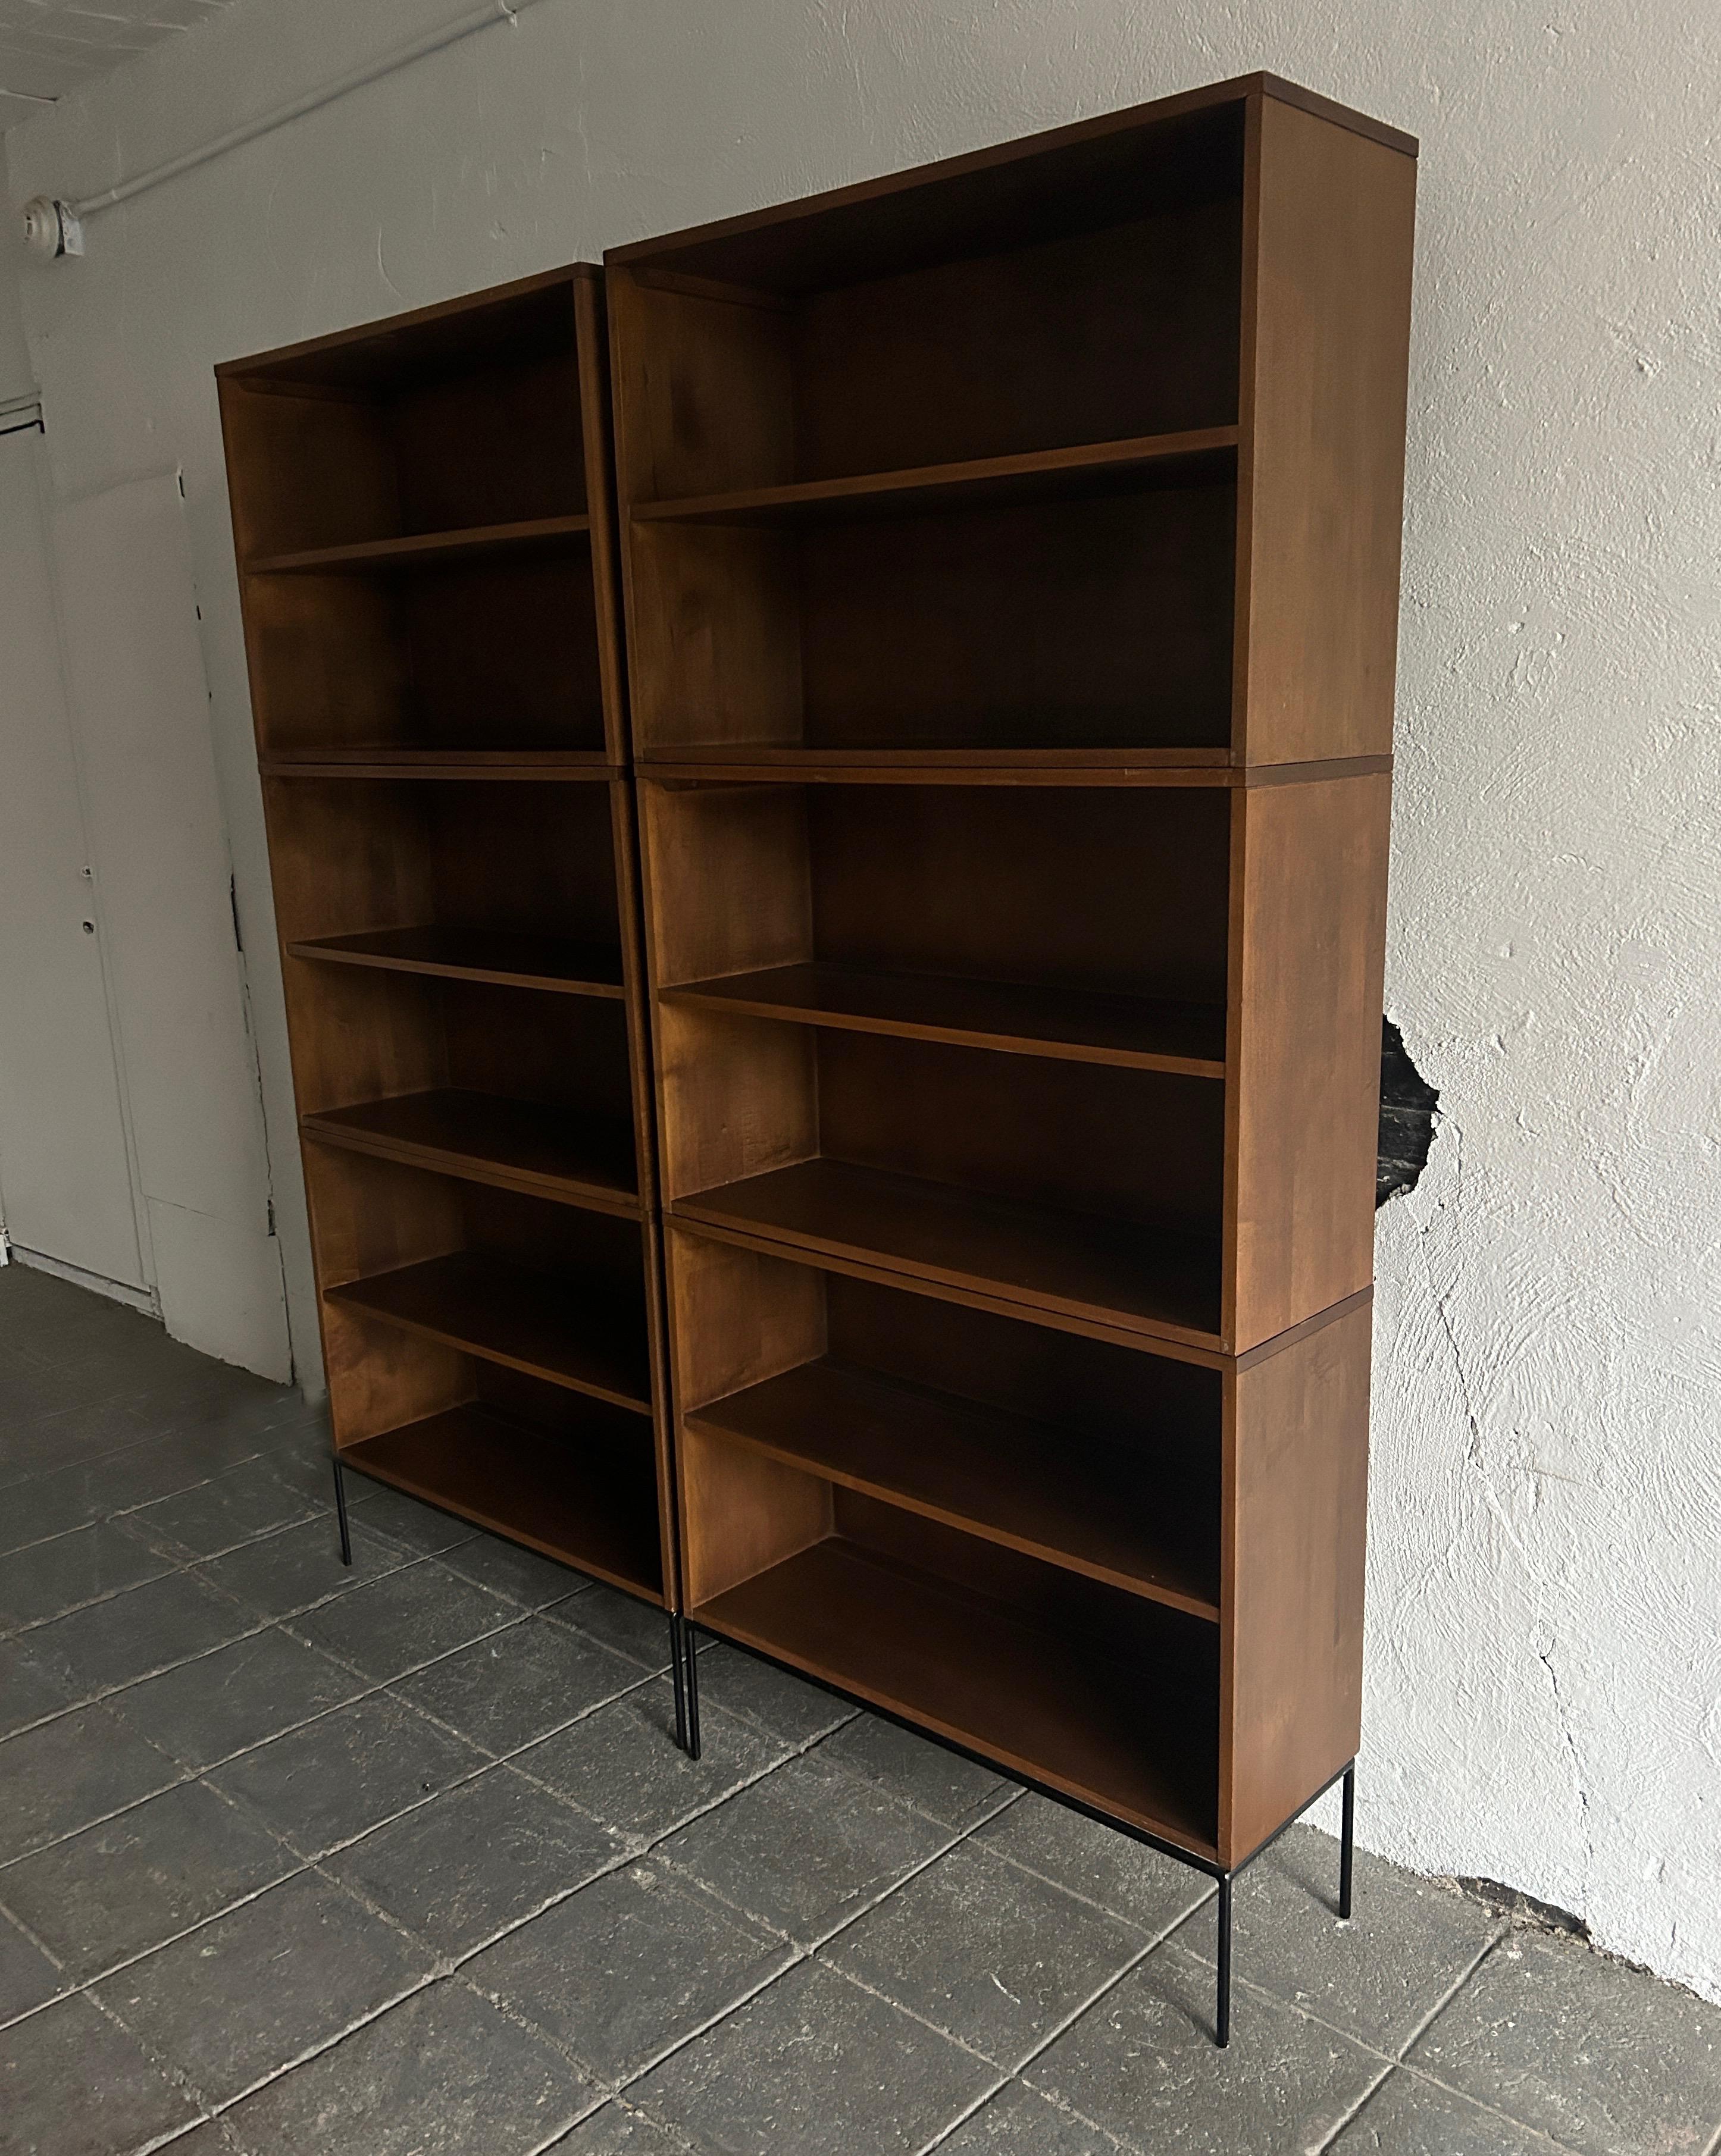 Pair of vintage midcentury Paul McCobb triple high bookcases bookshelves #1516 original walnut finish over solid maple with solid Iron 4 leg base. Beautiful bookcase set by Paul McCobb, circa 1950s Planner Group, single center fixed shelf, solid